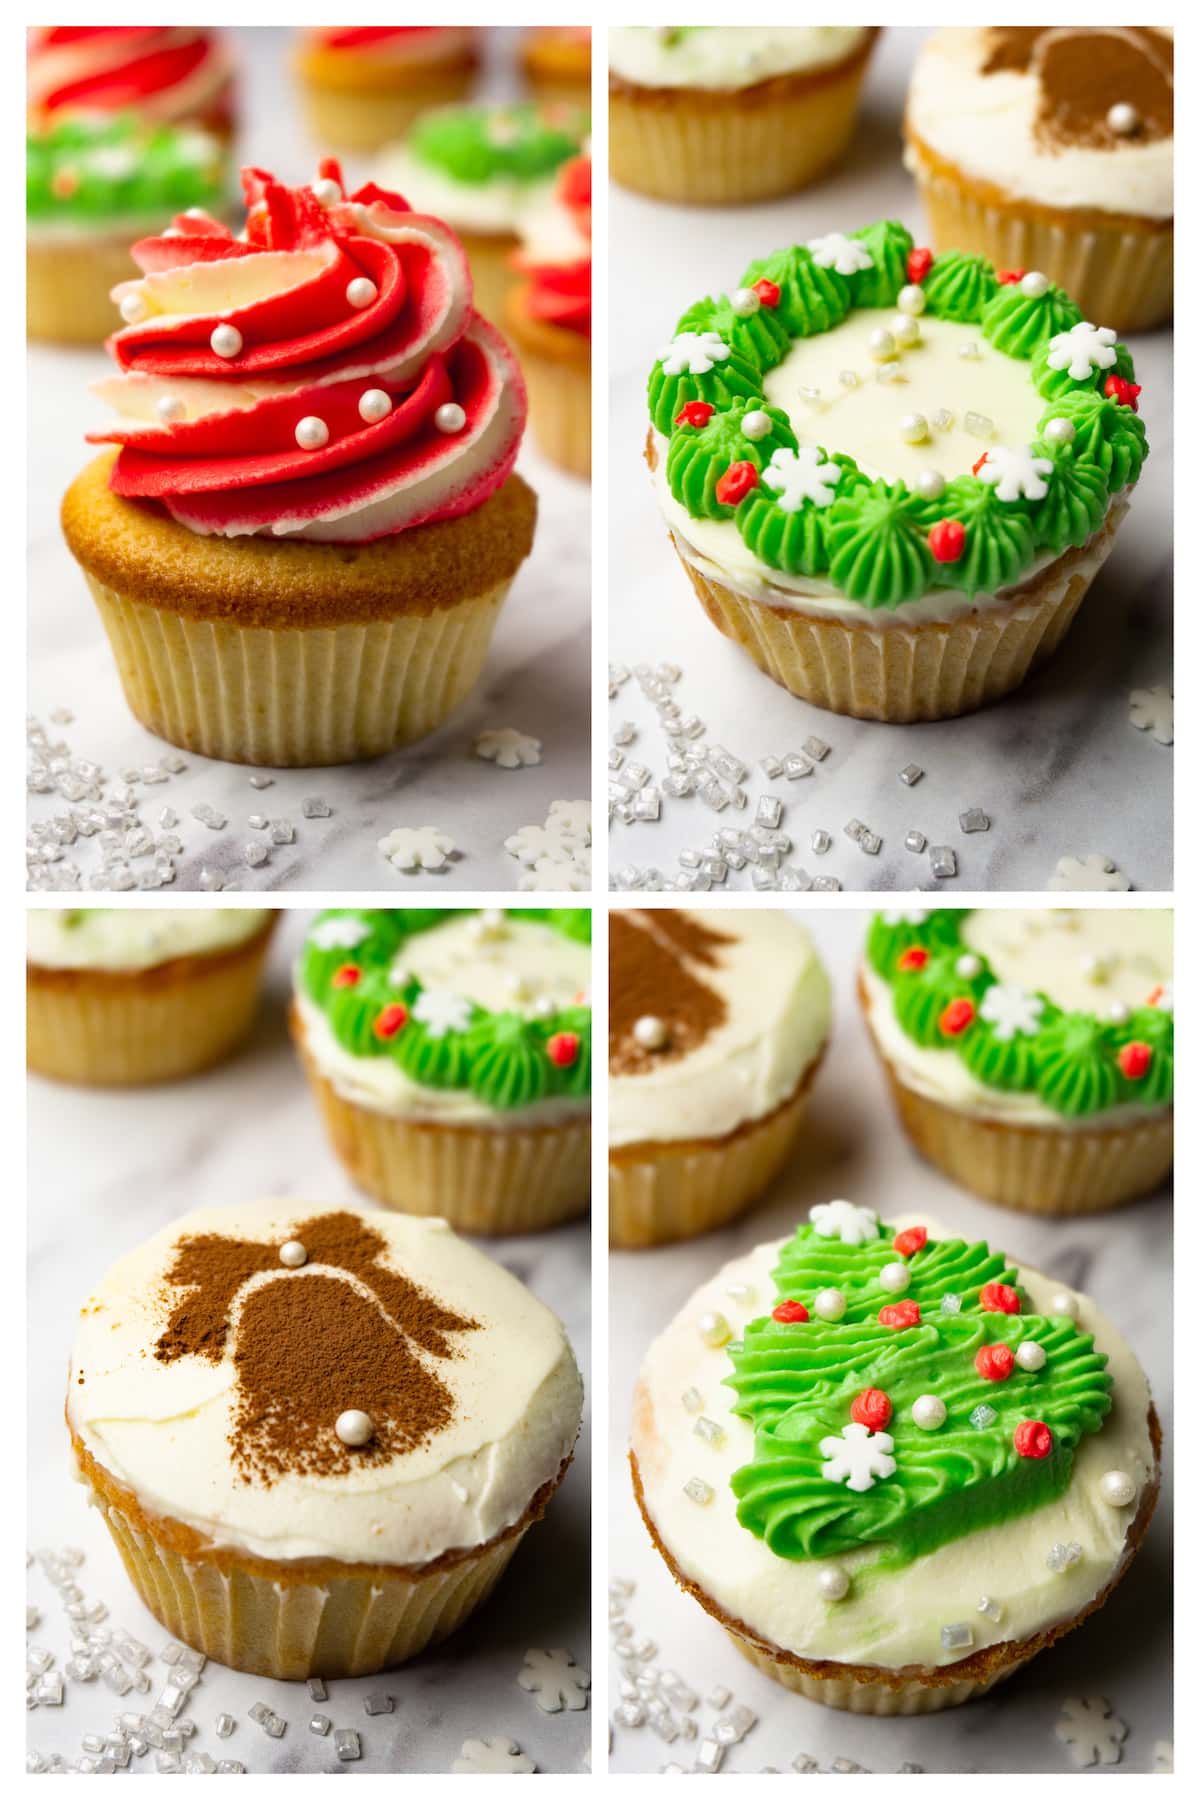 Collage image showing 4 different ways to decorate Christmas cupcakes.